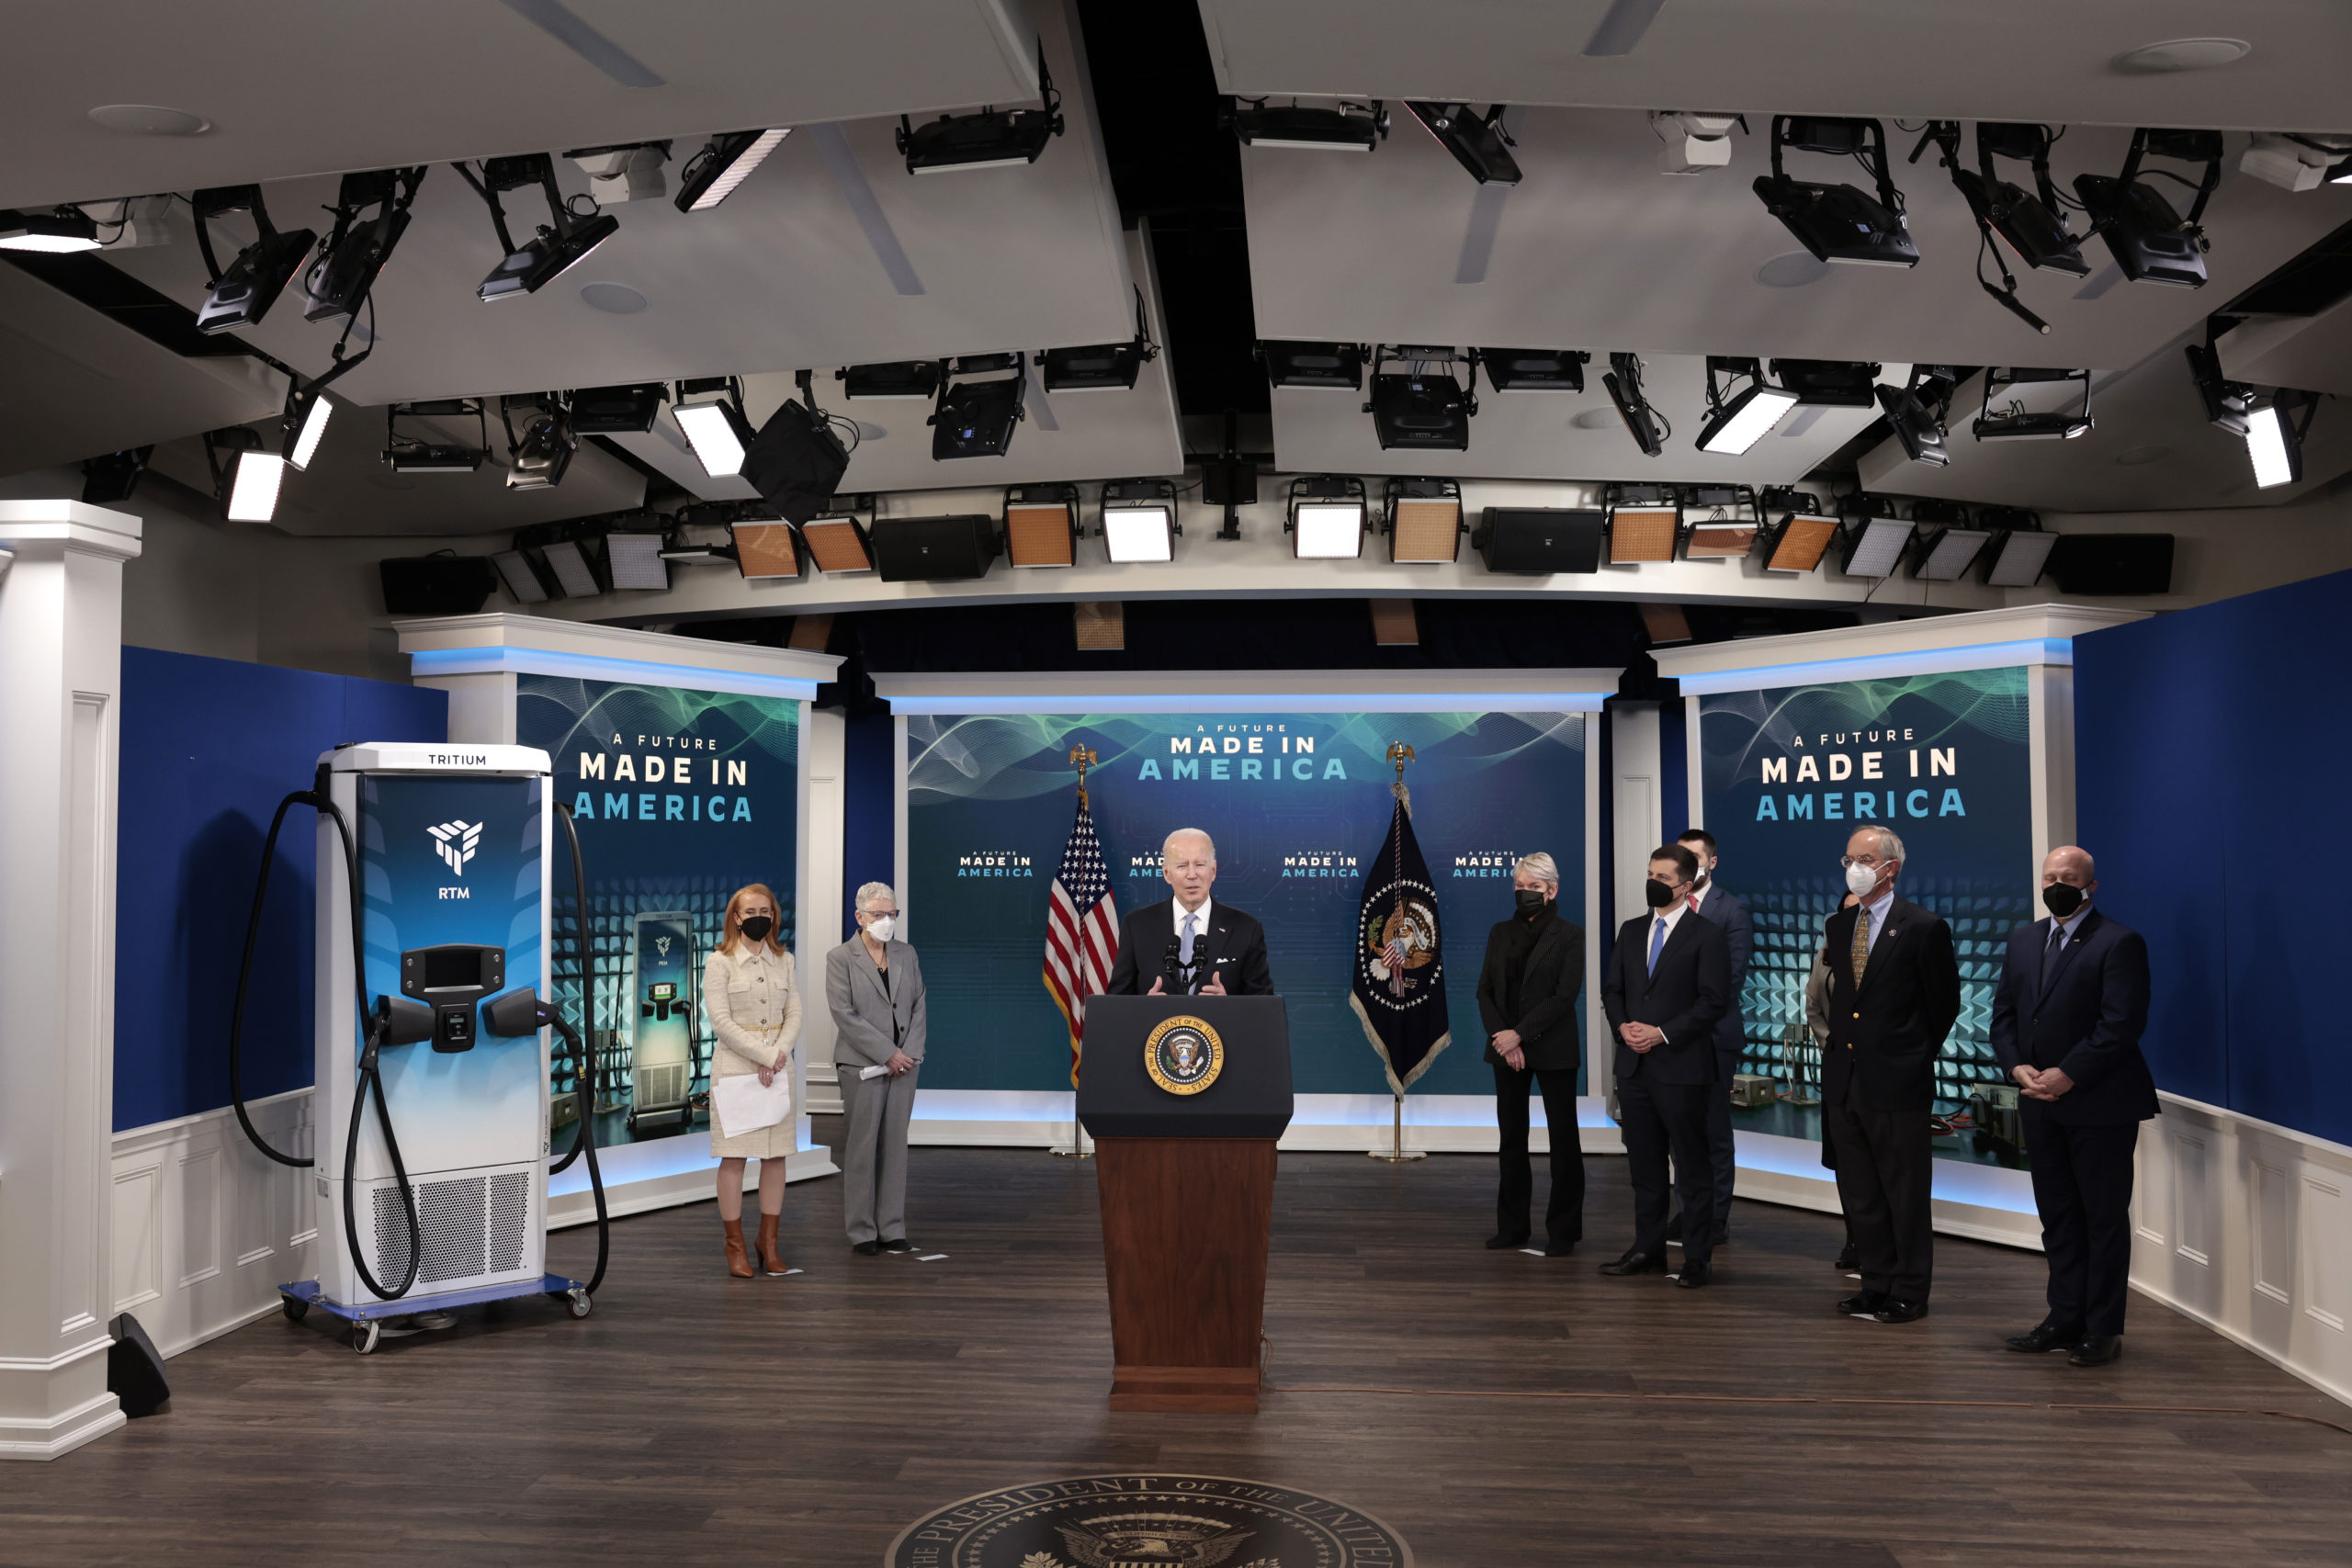 President Joe Biden delivers remarks on his administration's efforts to increase manufacturing alongside members of his cabinet and Tritium CEO Jane Cooper at the White House on Tuesday. (Anna Moneymaker/Getty Images)